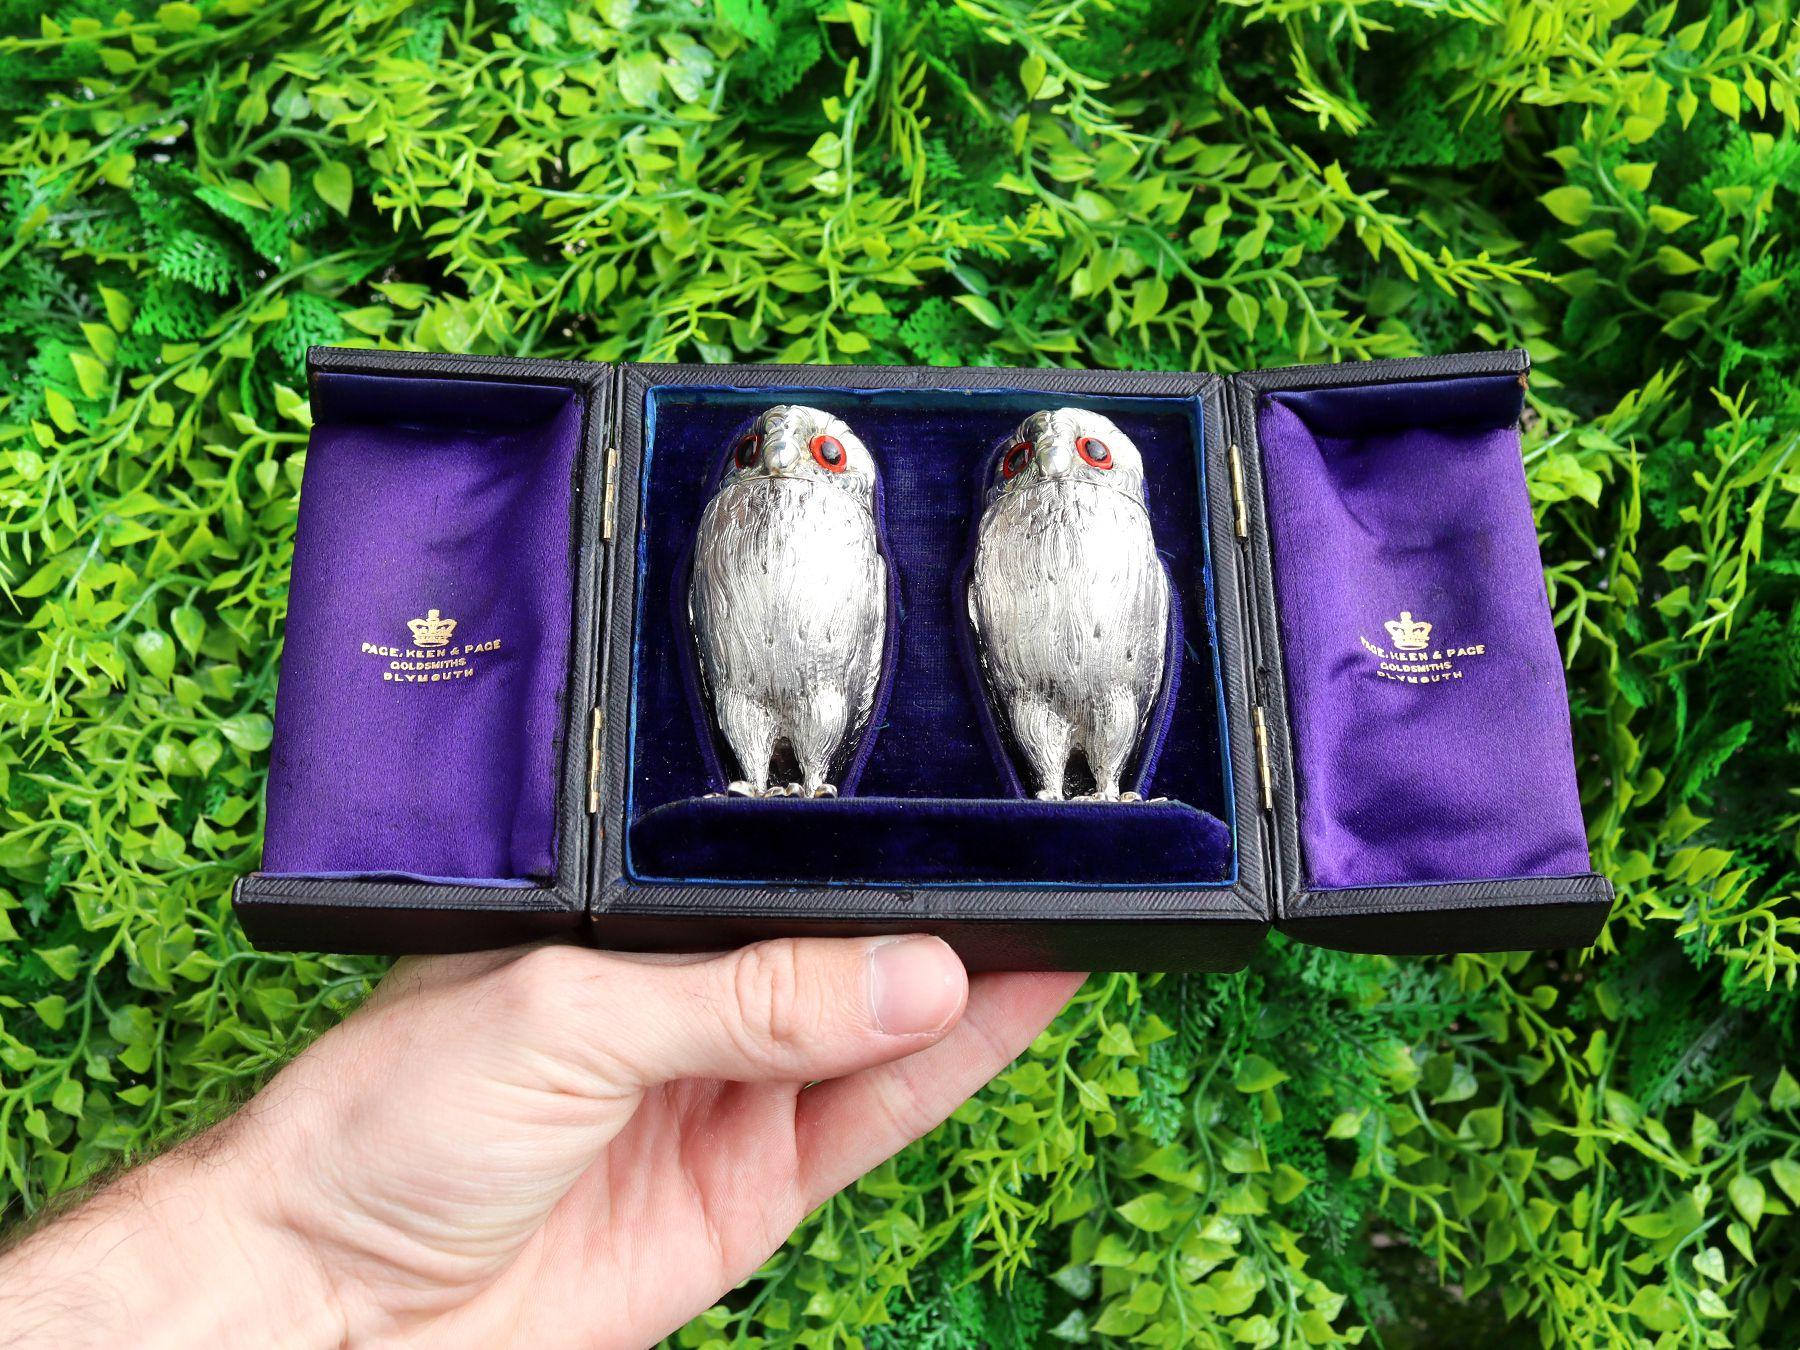 An exceptional, fine and impressive, pair of antique Victorian English cast sterling silver pepperettes / peppers modelled in the form of owls - boxed; an addition to our collectable silver collection

These exceptional antique Victorian cast